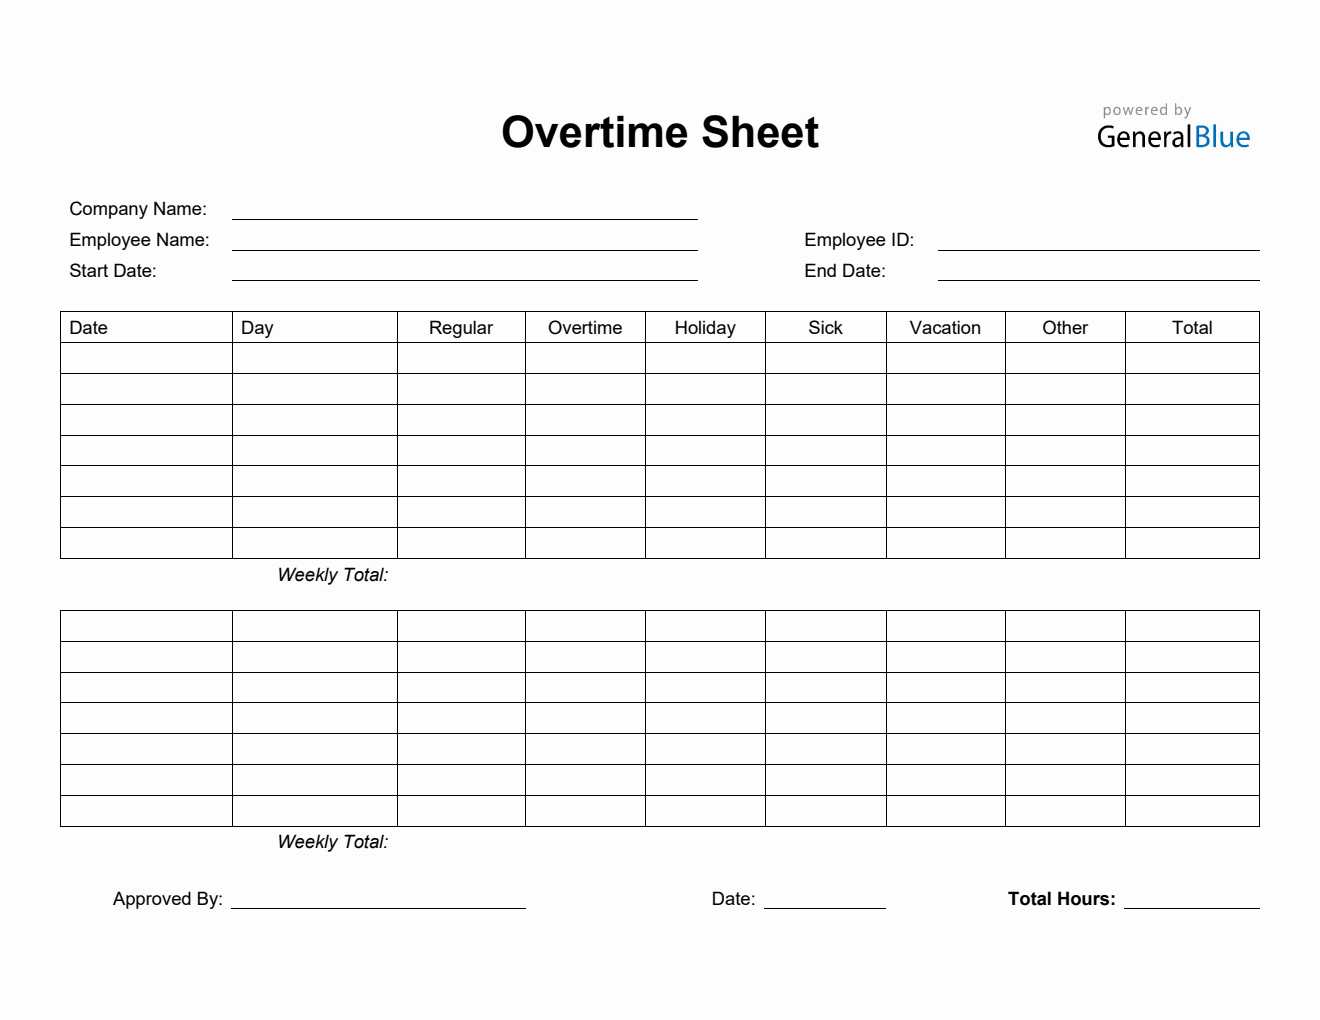 Overtime Sheet in Word (Simple)